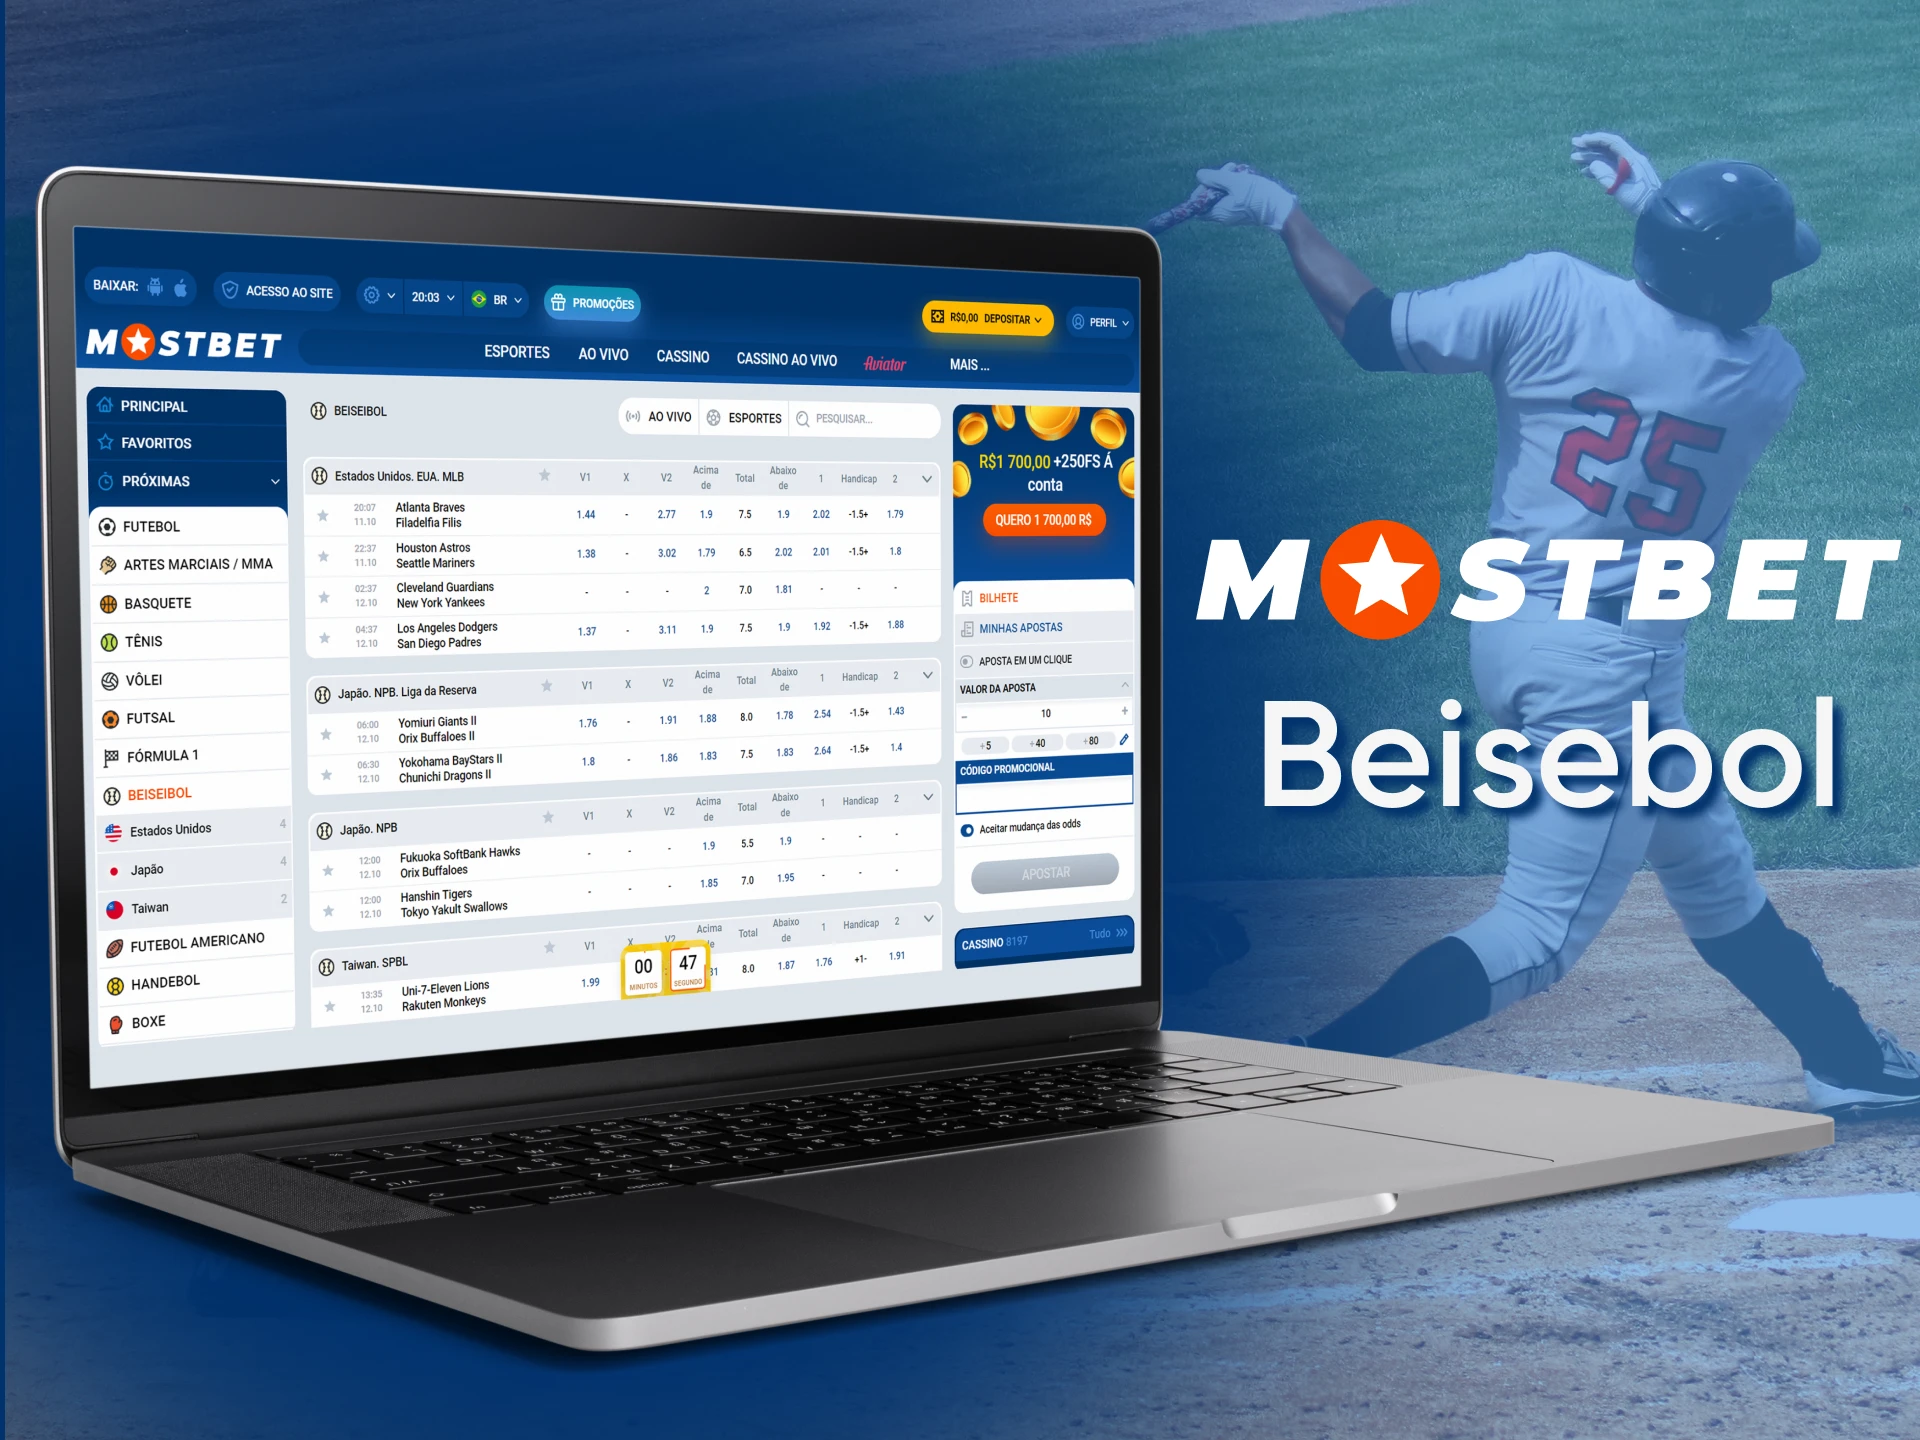 Bet on baseball with Mostbet.